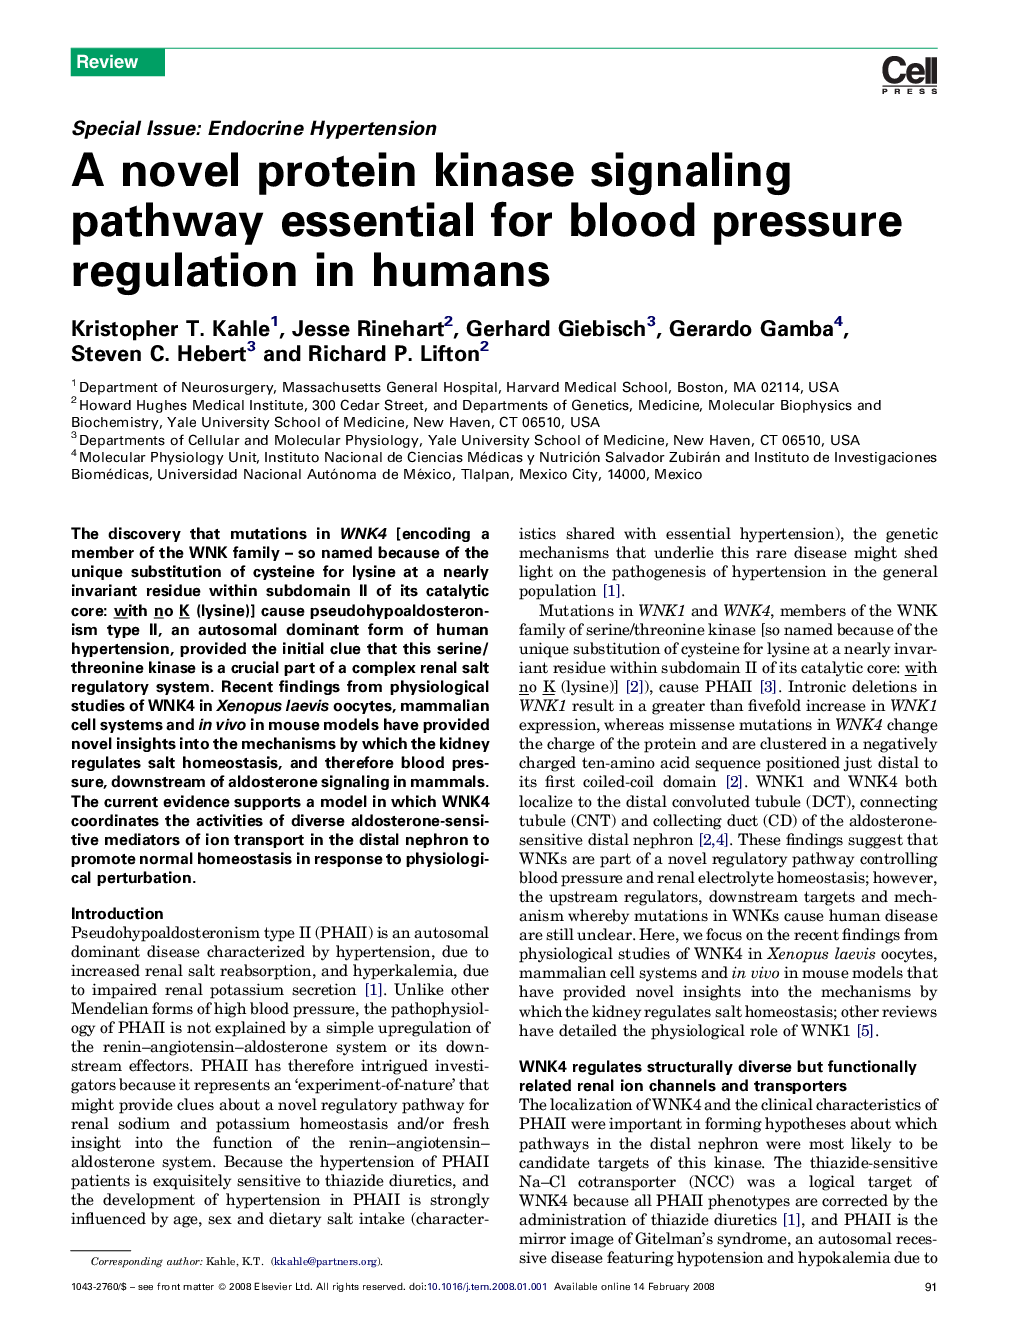 A novel protein kinase signaling pathway essential for blood pressure regulation in humans